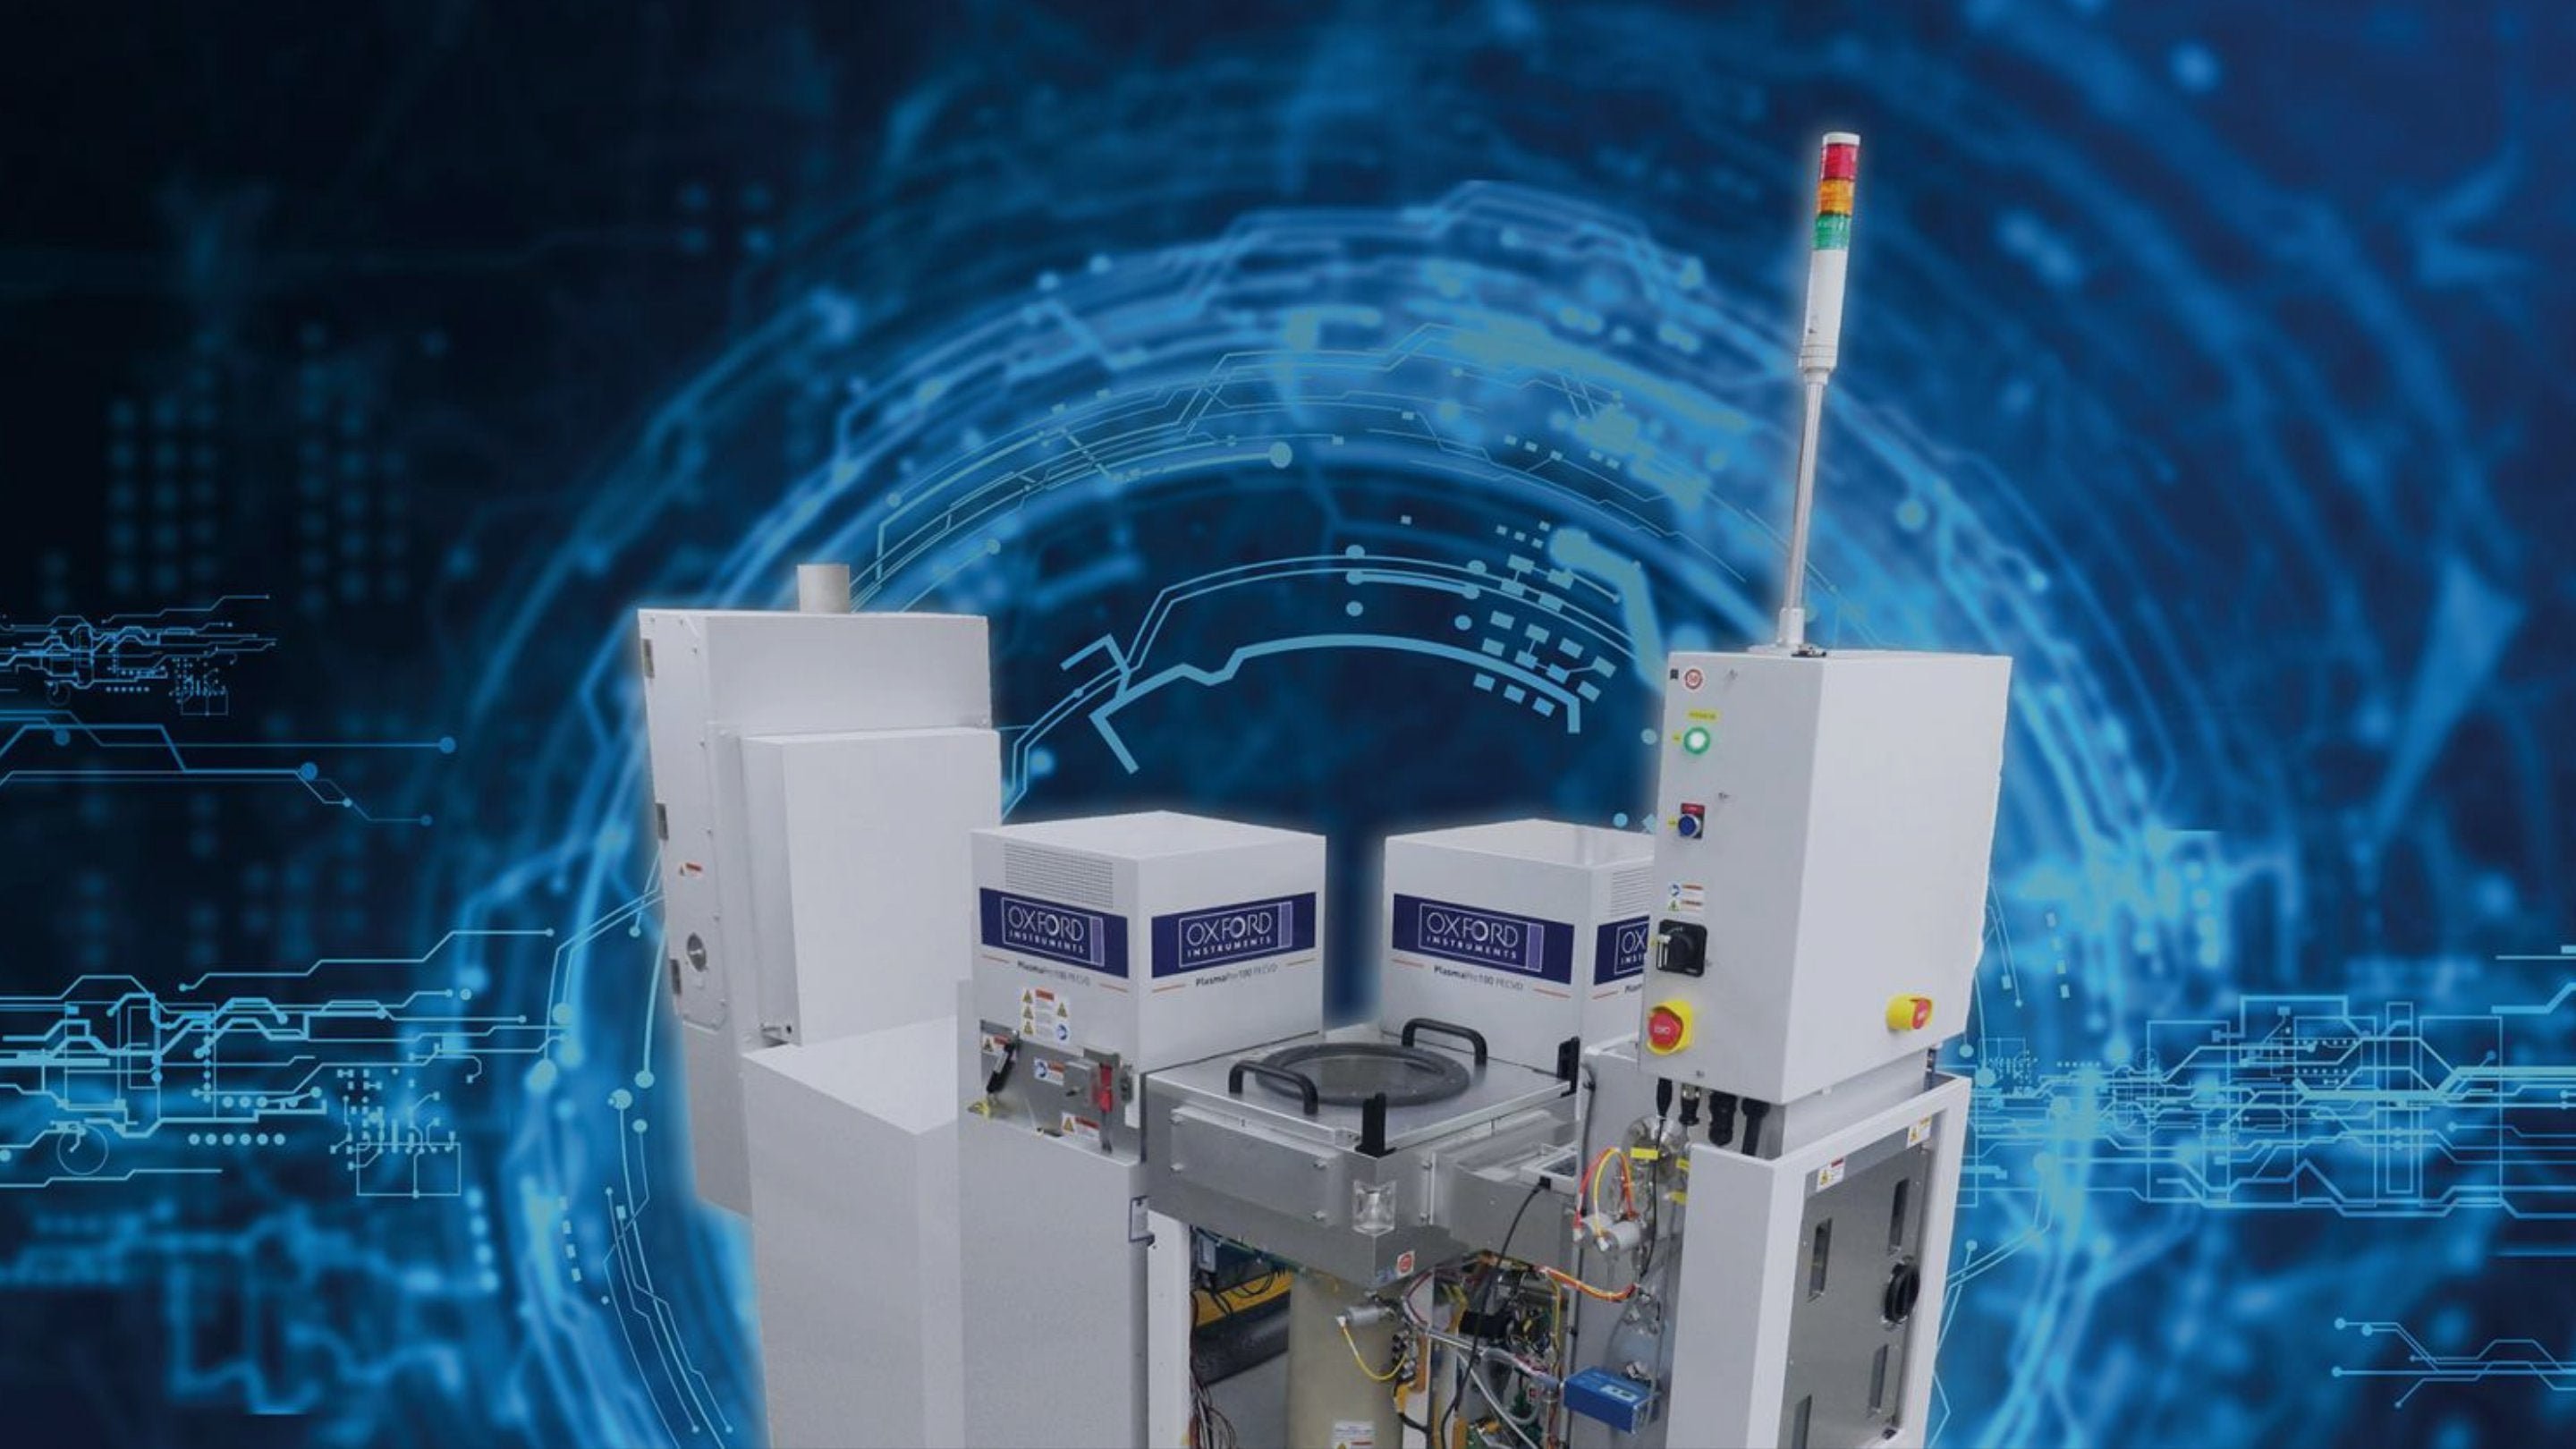 Adtech Photonics chooses Oxford Instruments for Infrared Laser  manufacturing - Oxford Instruments